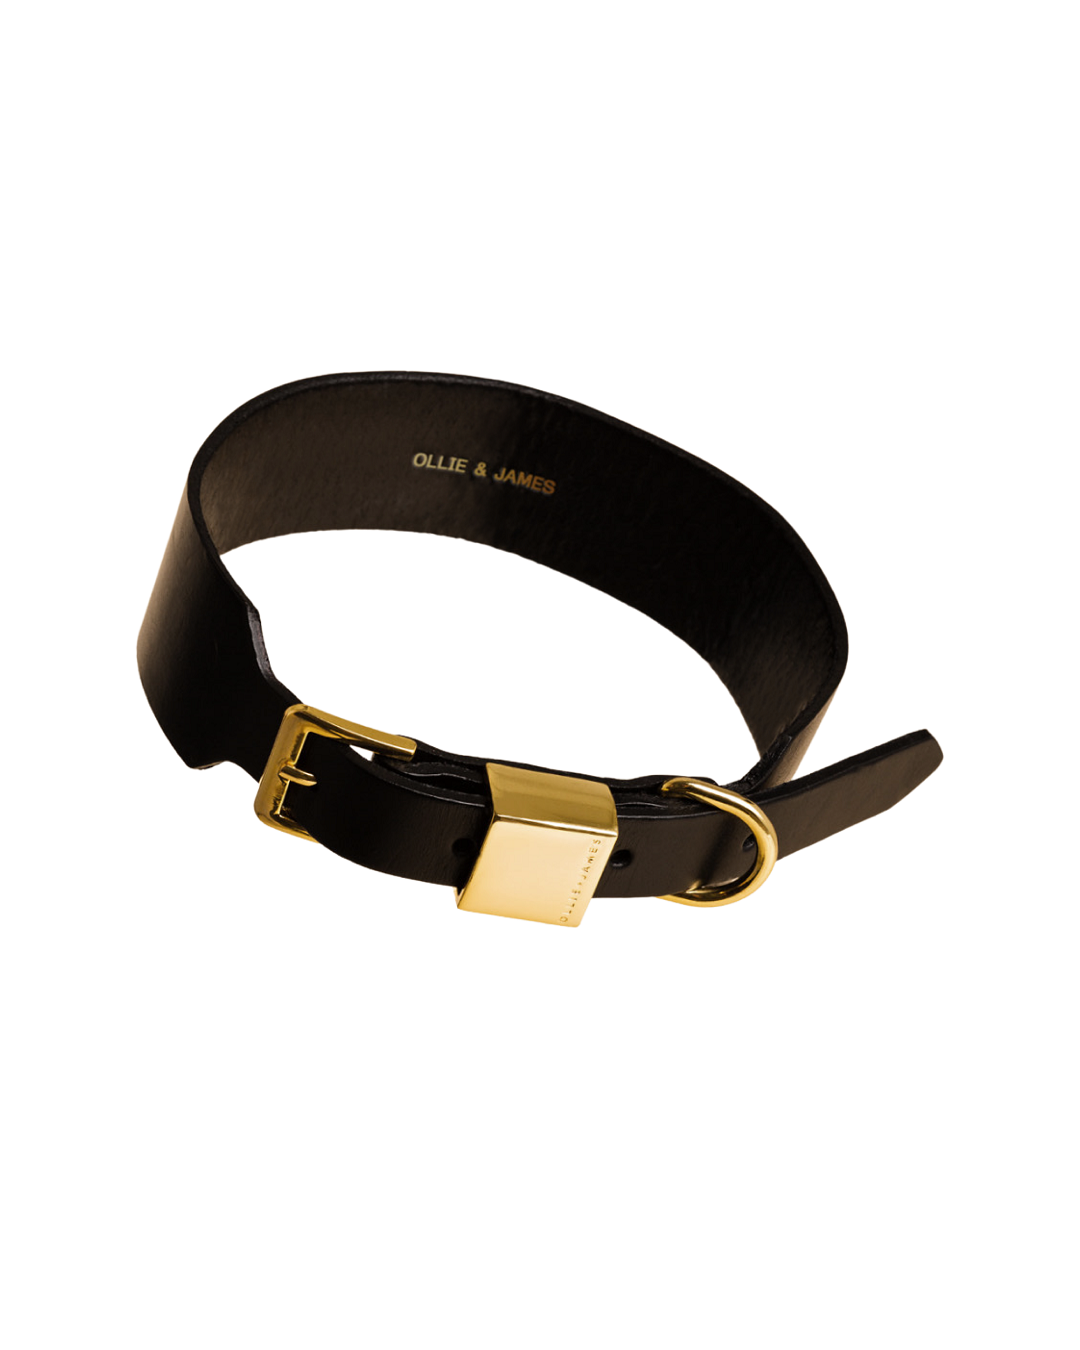 Ollie and James collar in sable black leather